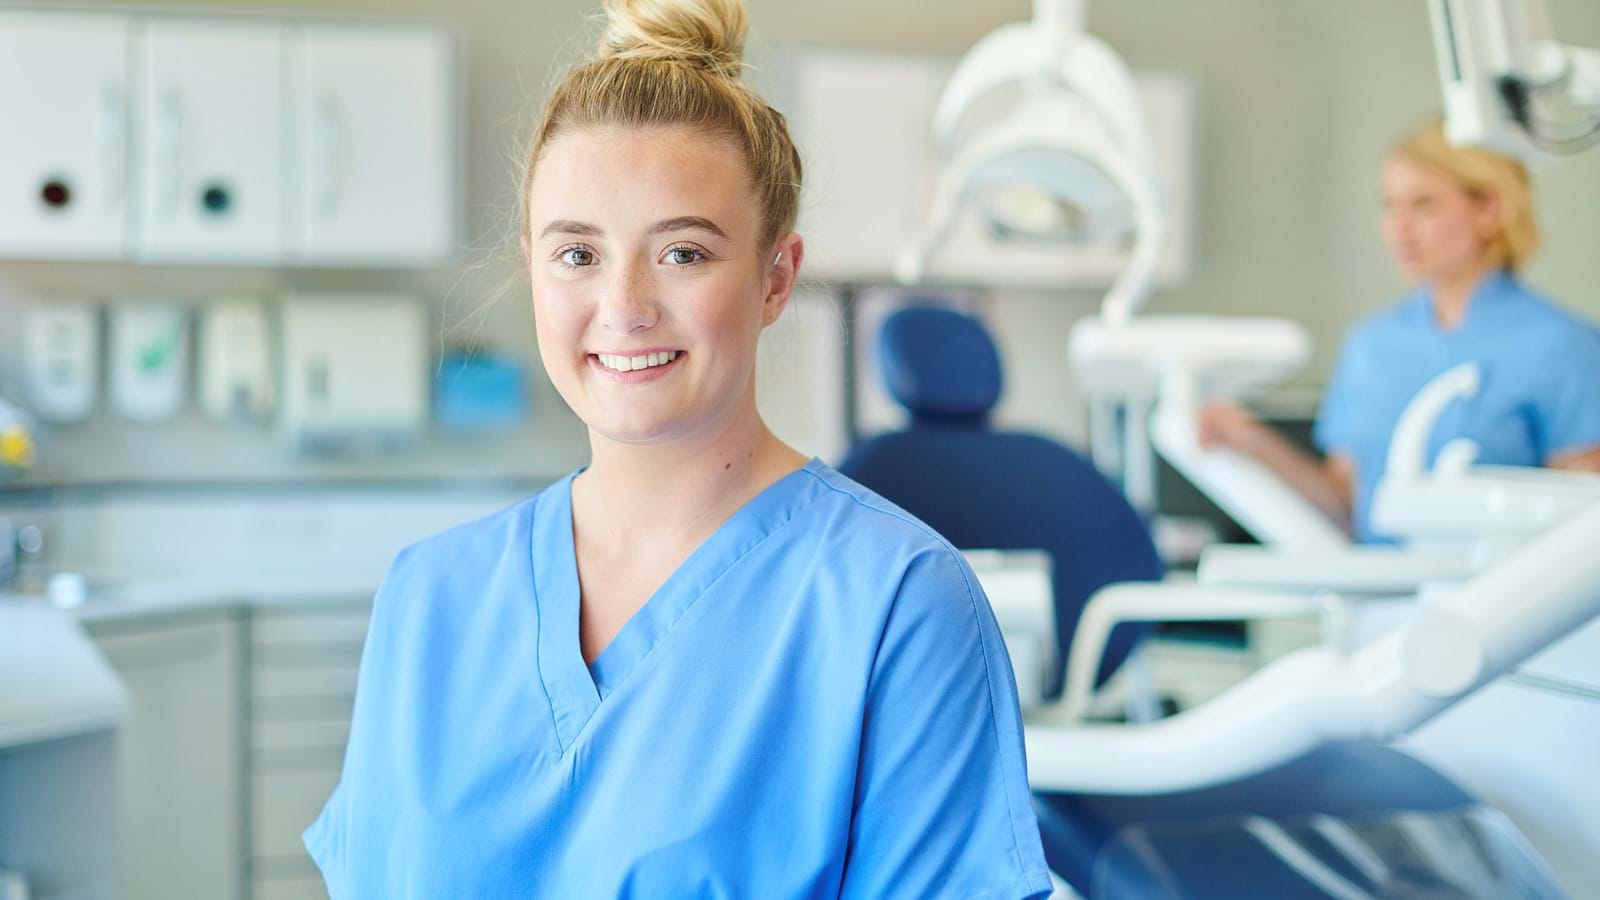 Female dentist smiling in front of dentist chair